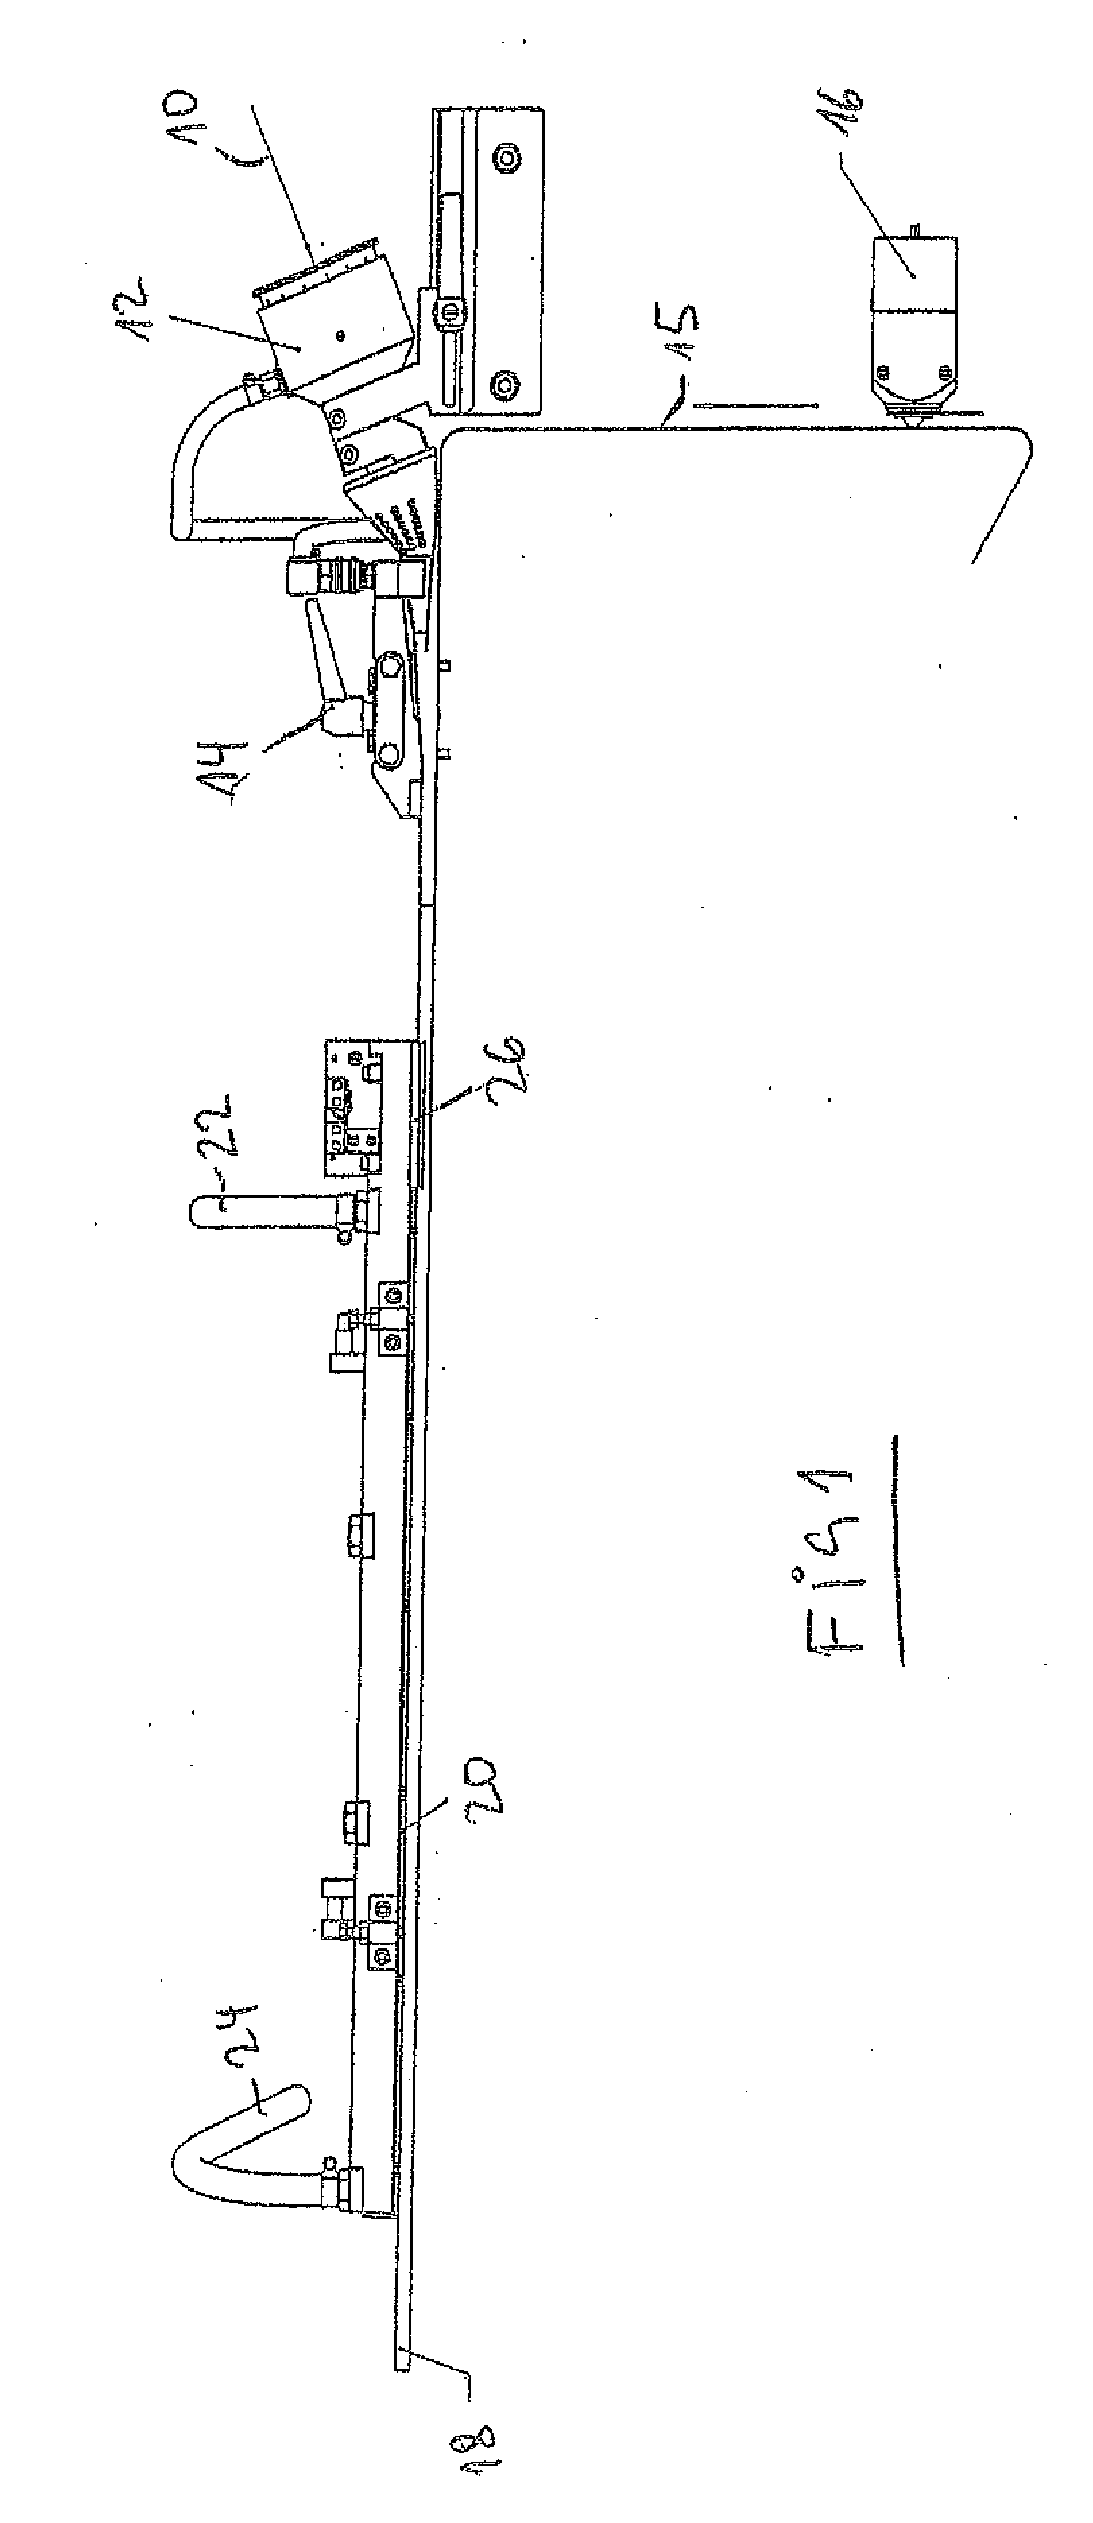 Apparatus for Glueing Together the Wrap of An Endless Tow of Filter Material